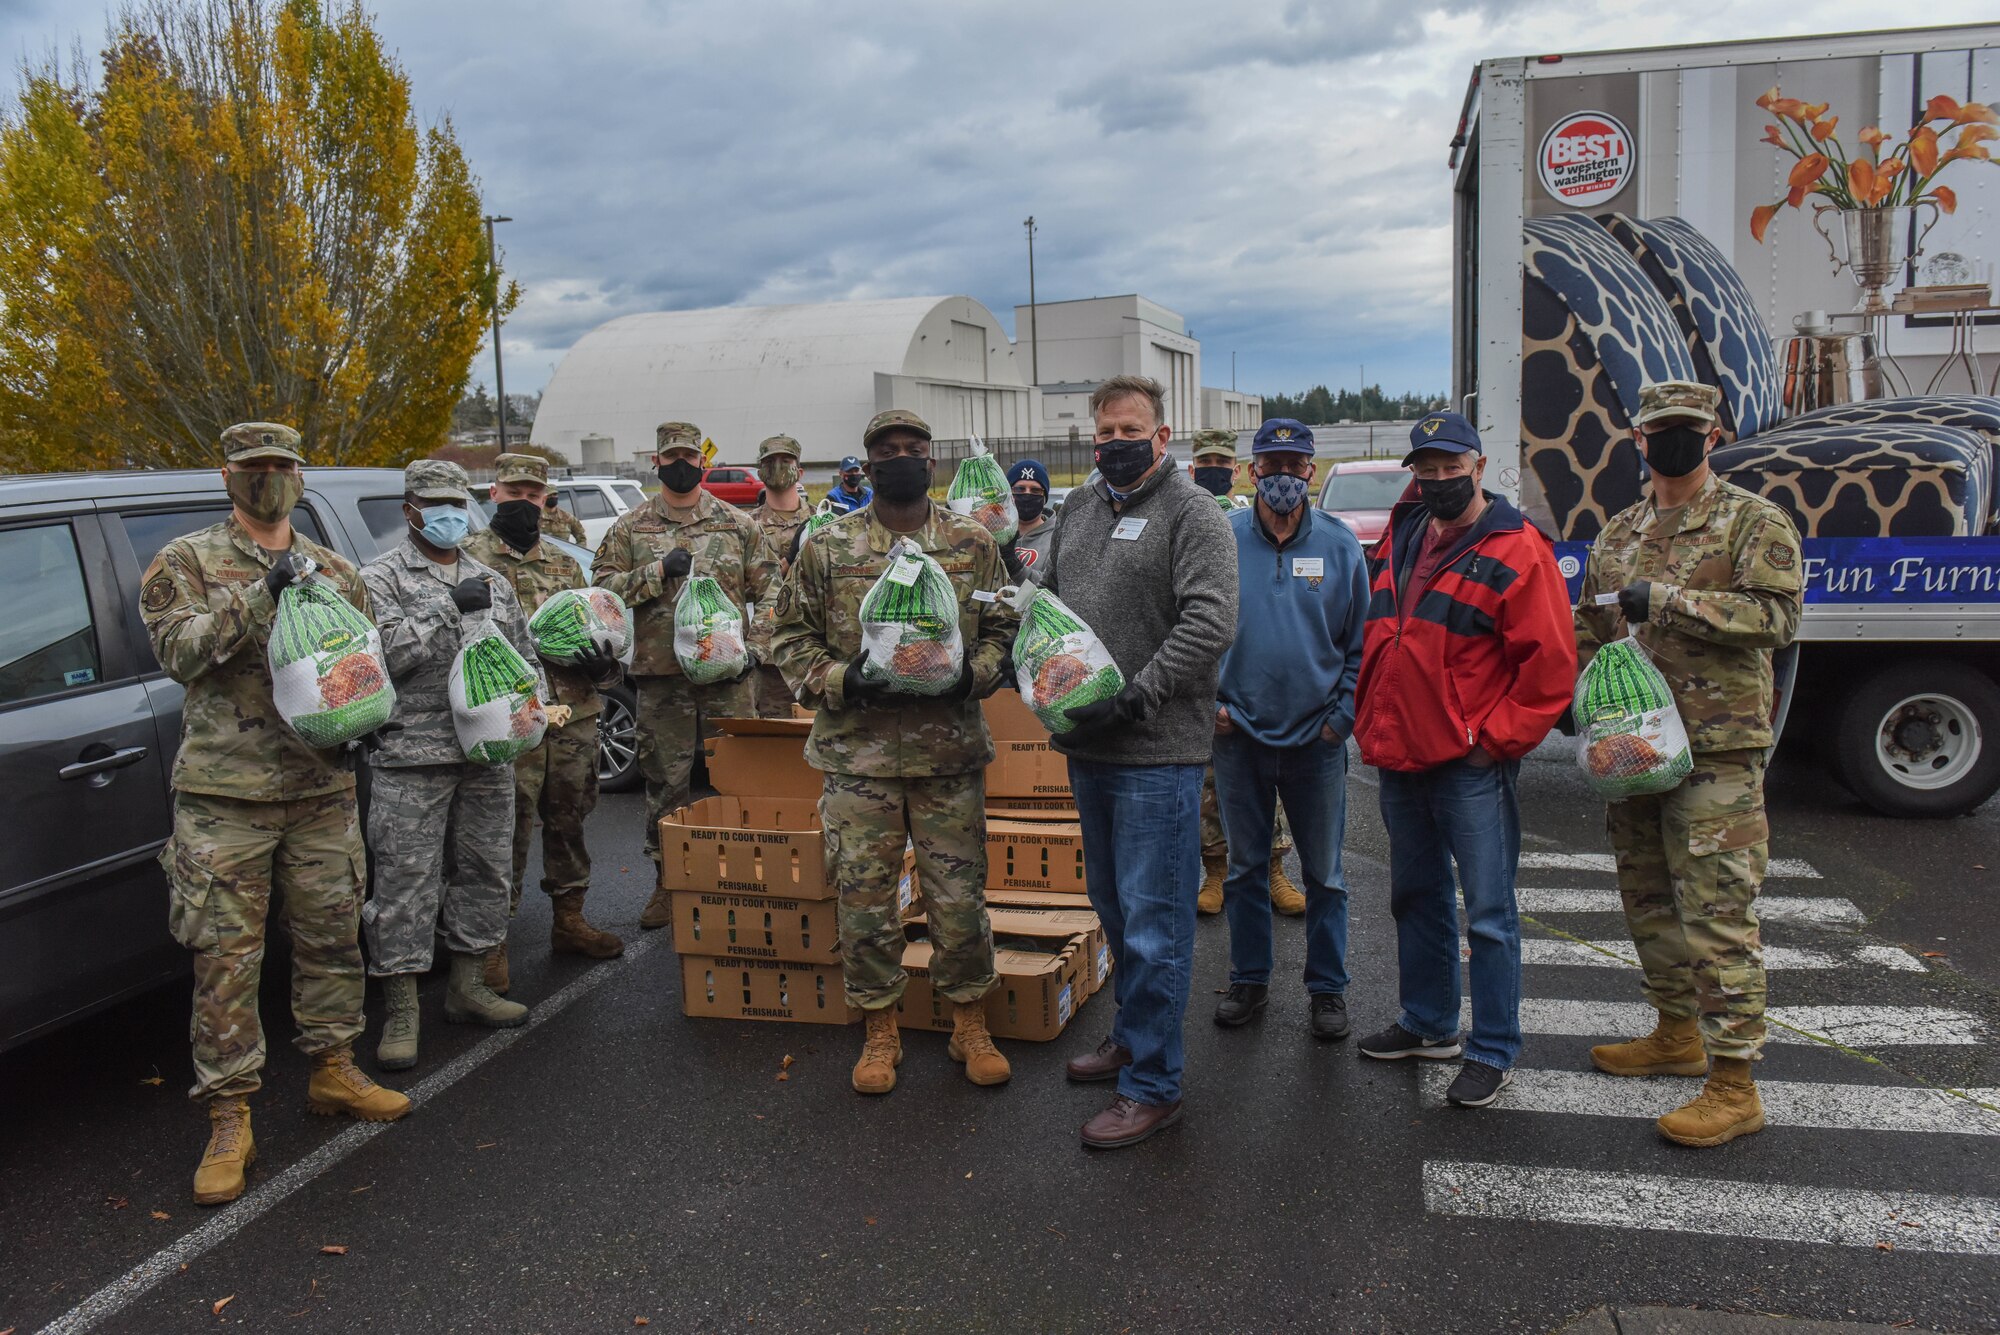 U.S. Air Force Airmen from the 627th Logistics Readiness Squadron and 62nd Maintenance Squadron help distribute turkeys during Operation Turkey Drop at Joint Base Lewis-McChord, Wash., Nov. 17, 2020. The Air Force Association McChord Field Chapter and the Pierce Military and Business Alliance organized the drop of more than 400 turkeys to Airmen at Joint Base Lewis-McChord for the Thanksgiving holiday. (U.S. Air Force photo by Airman 1st Class Callie Norton)